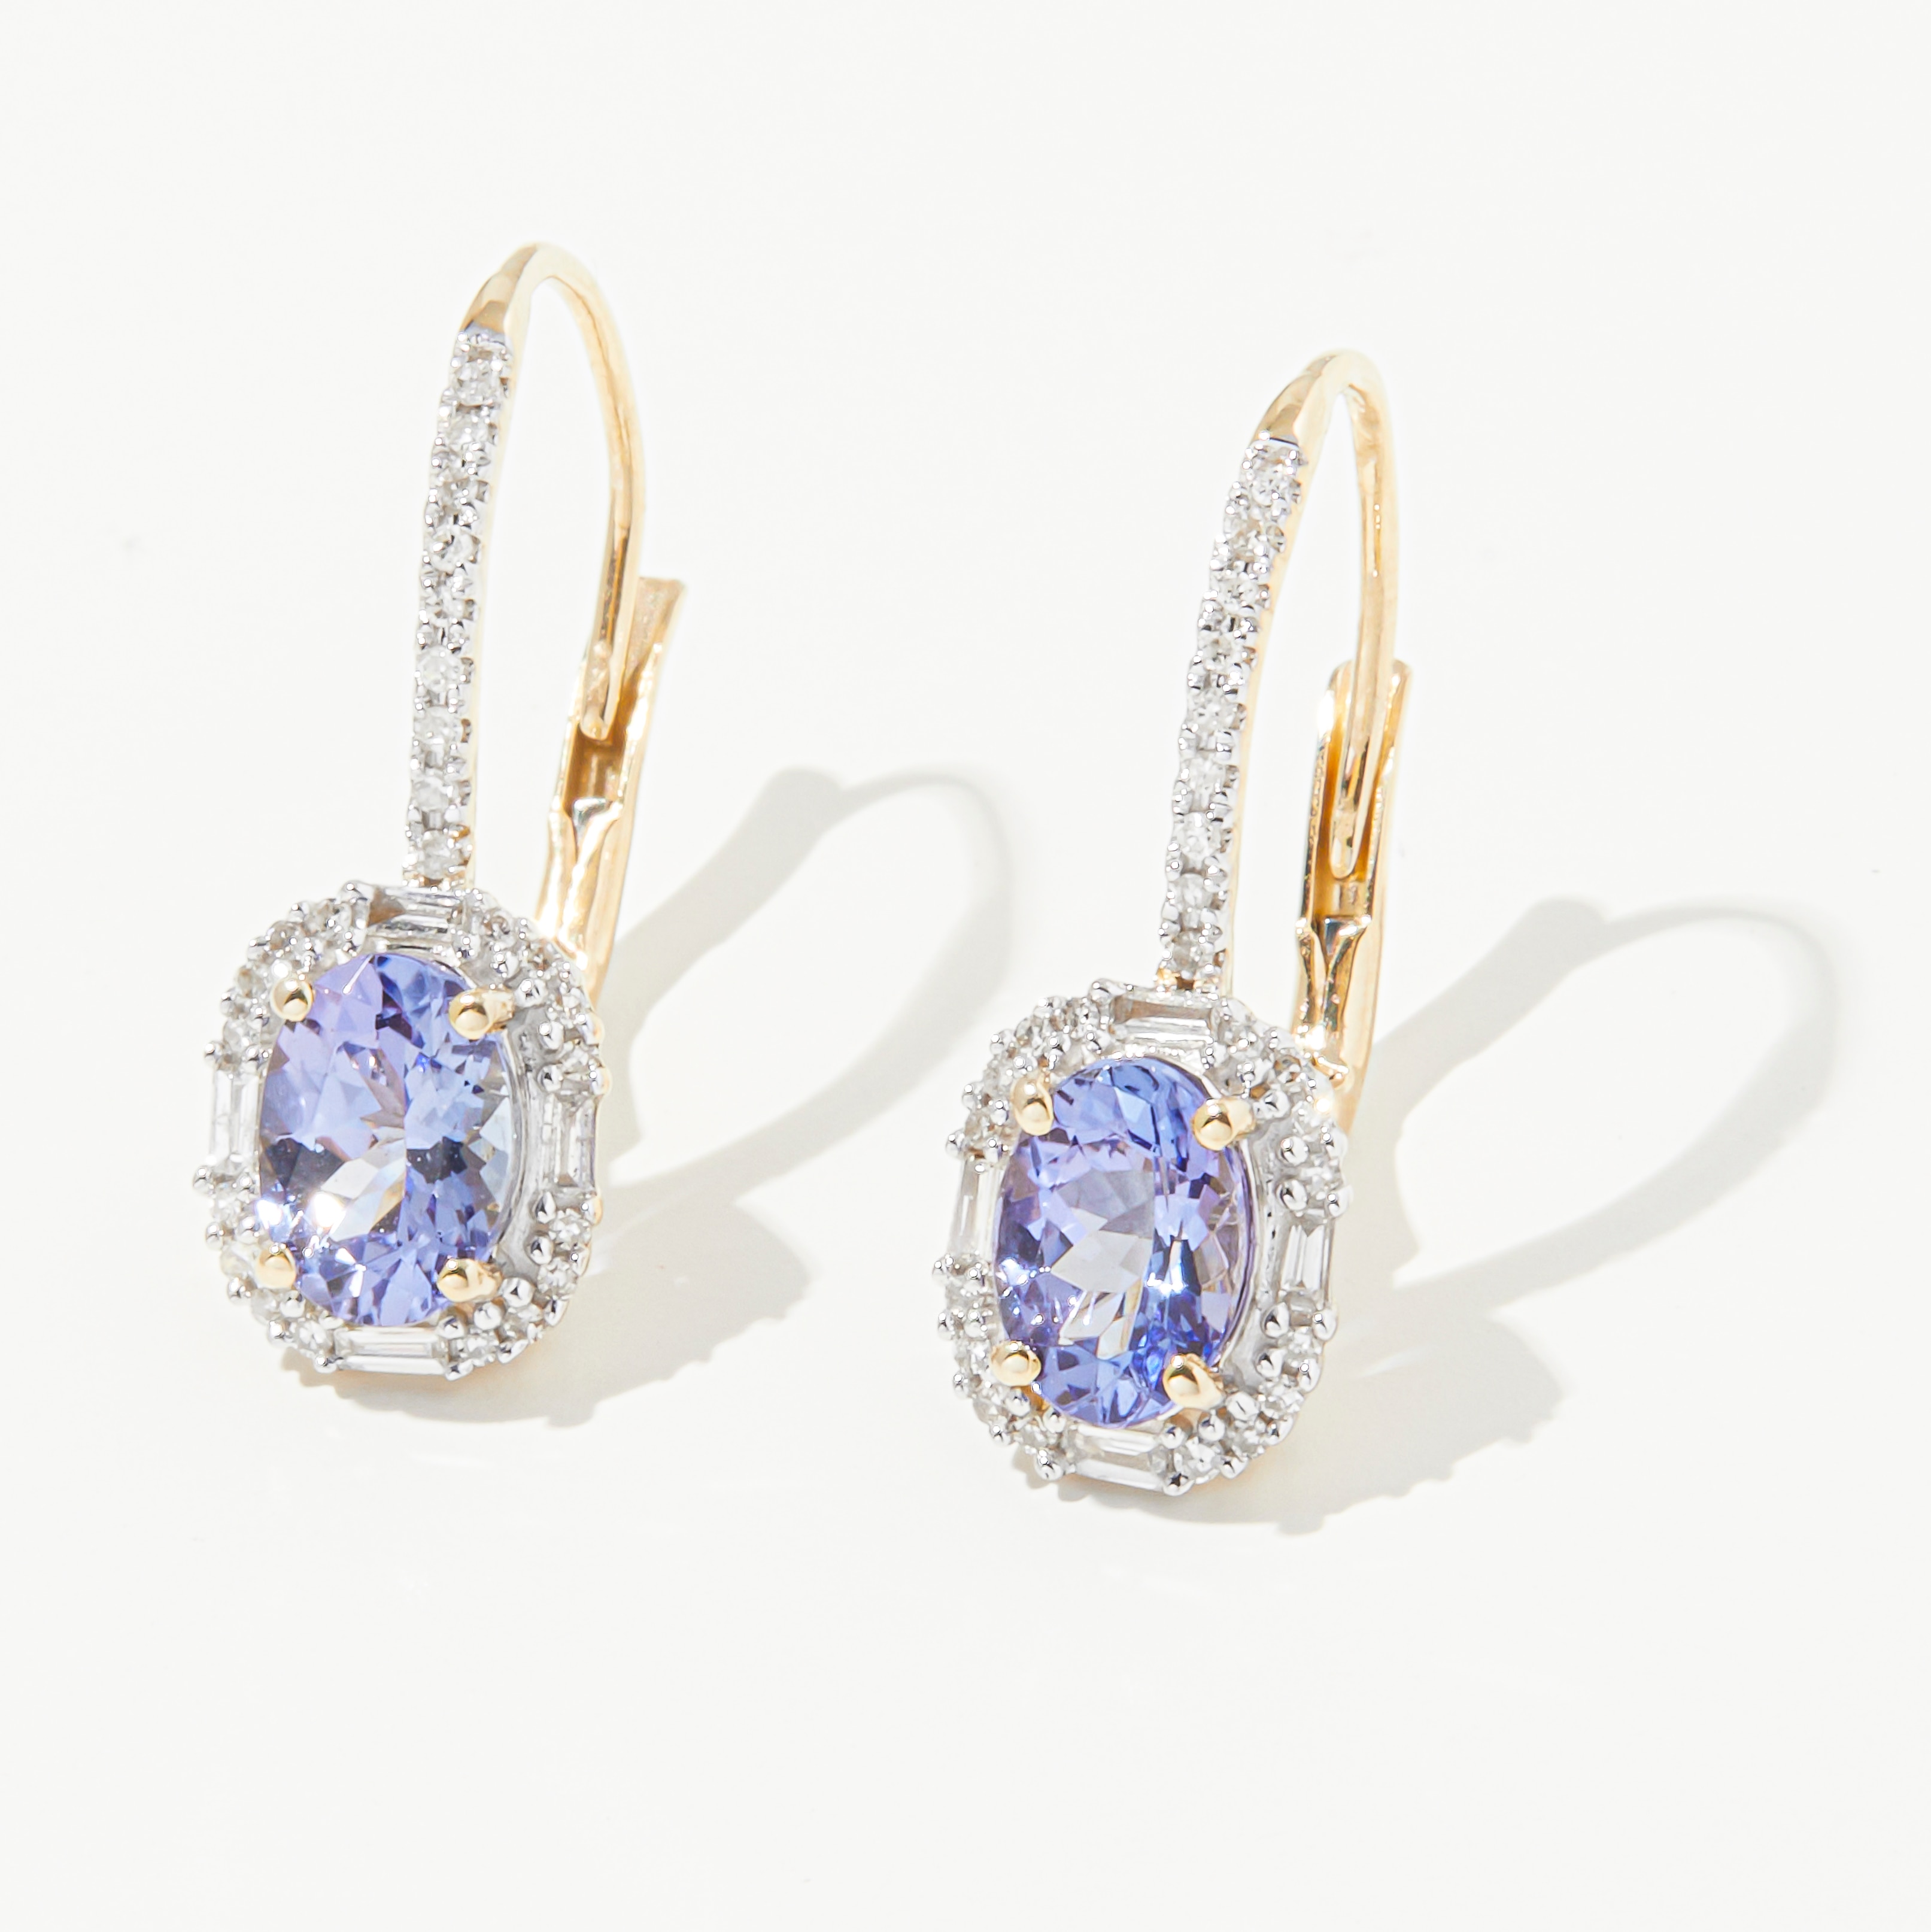 Gem Creations 14K Gold 7 mm x 5 mm Oval Tanzanite and 0.23 ctw White  Diamond Earrings